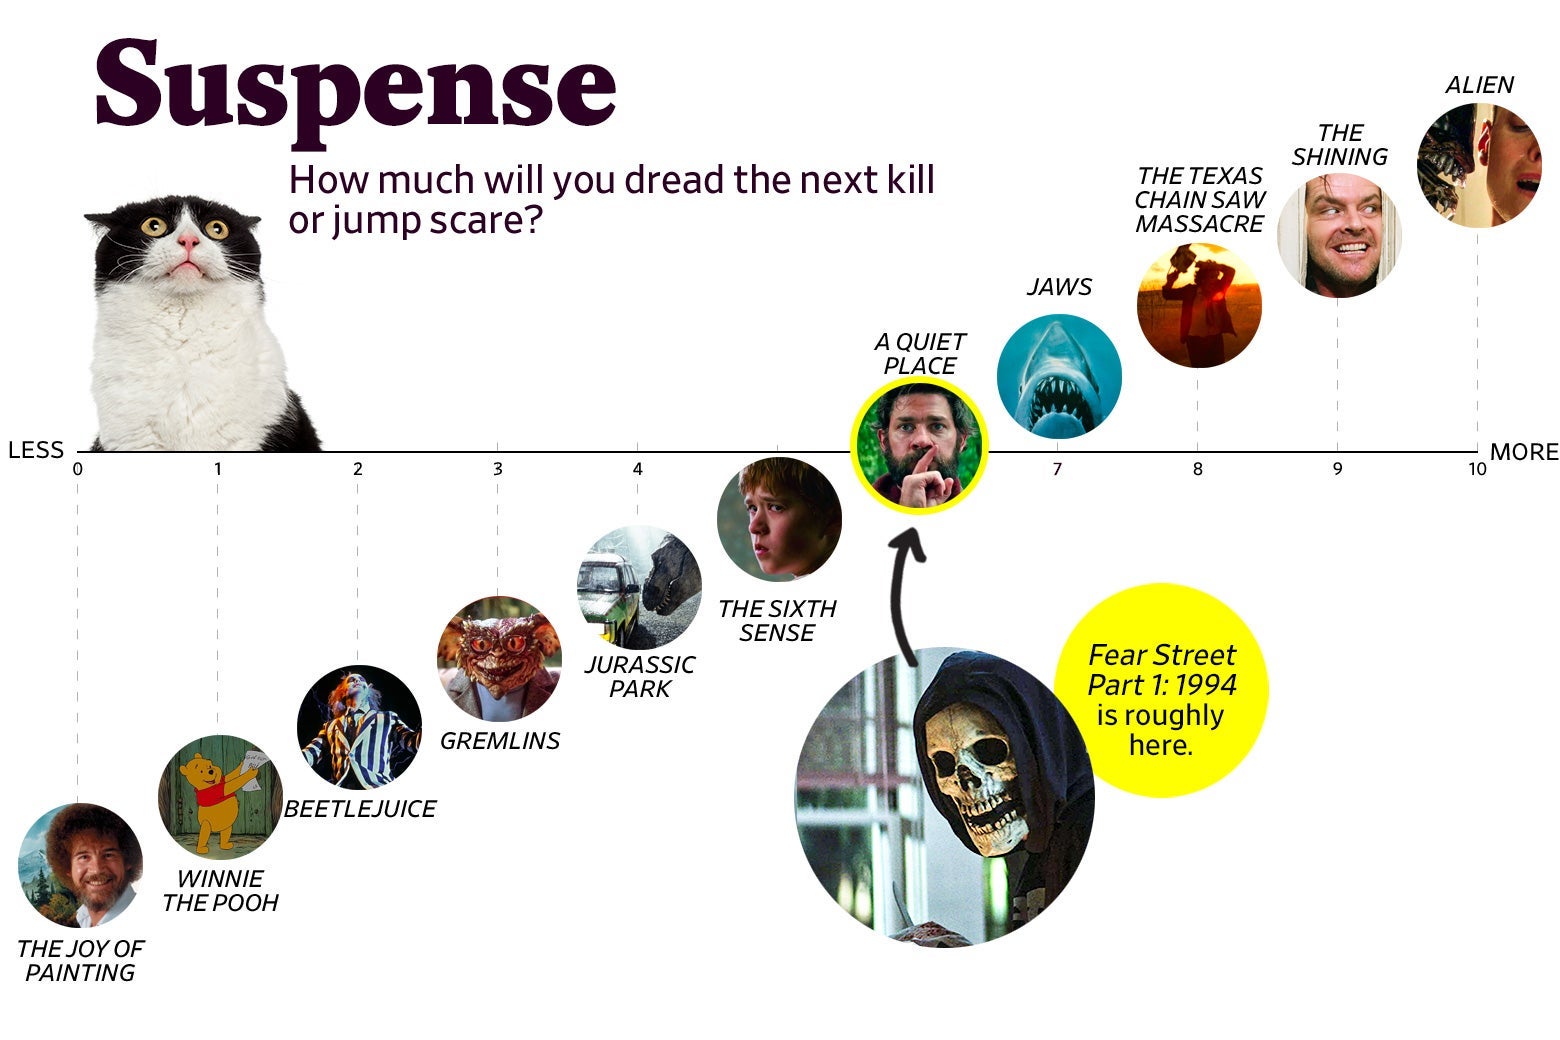 A chart titled “Suspense: How much will you dread the next kill or jump scare?” shows that Fear Street ranks a 6 in suspense, roughly the same as A Quiet Place. The scale ranges from The Joy of Painting (0) to Alien (10). 